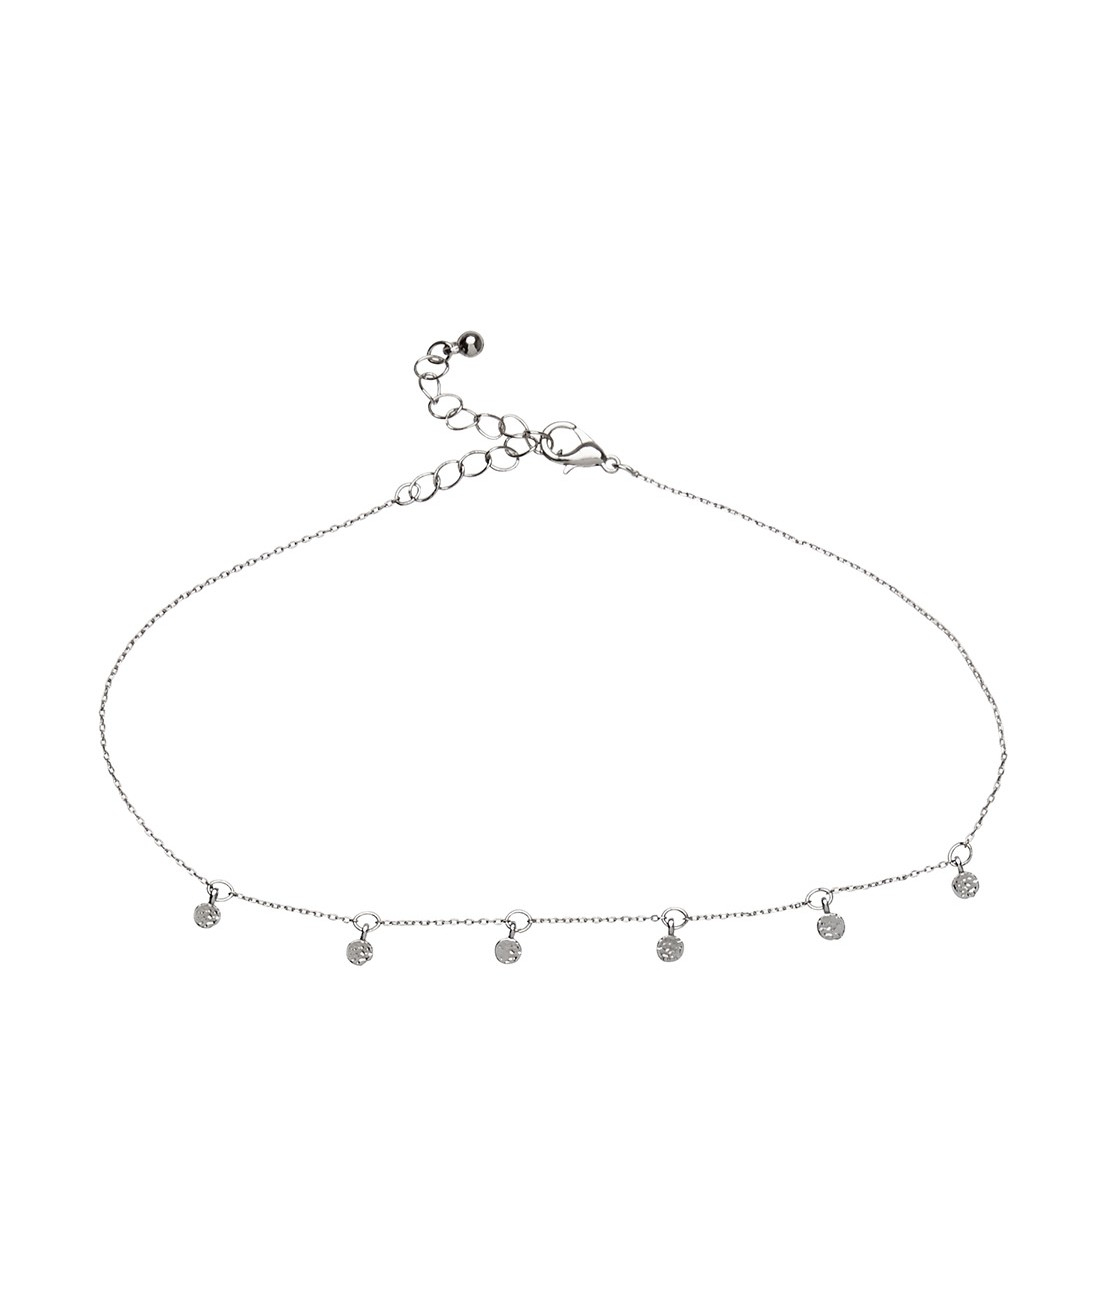 Necklace Length Diagram Jewellery Silver Dainty Choker Necklace Accessories Sportsgirl